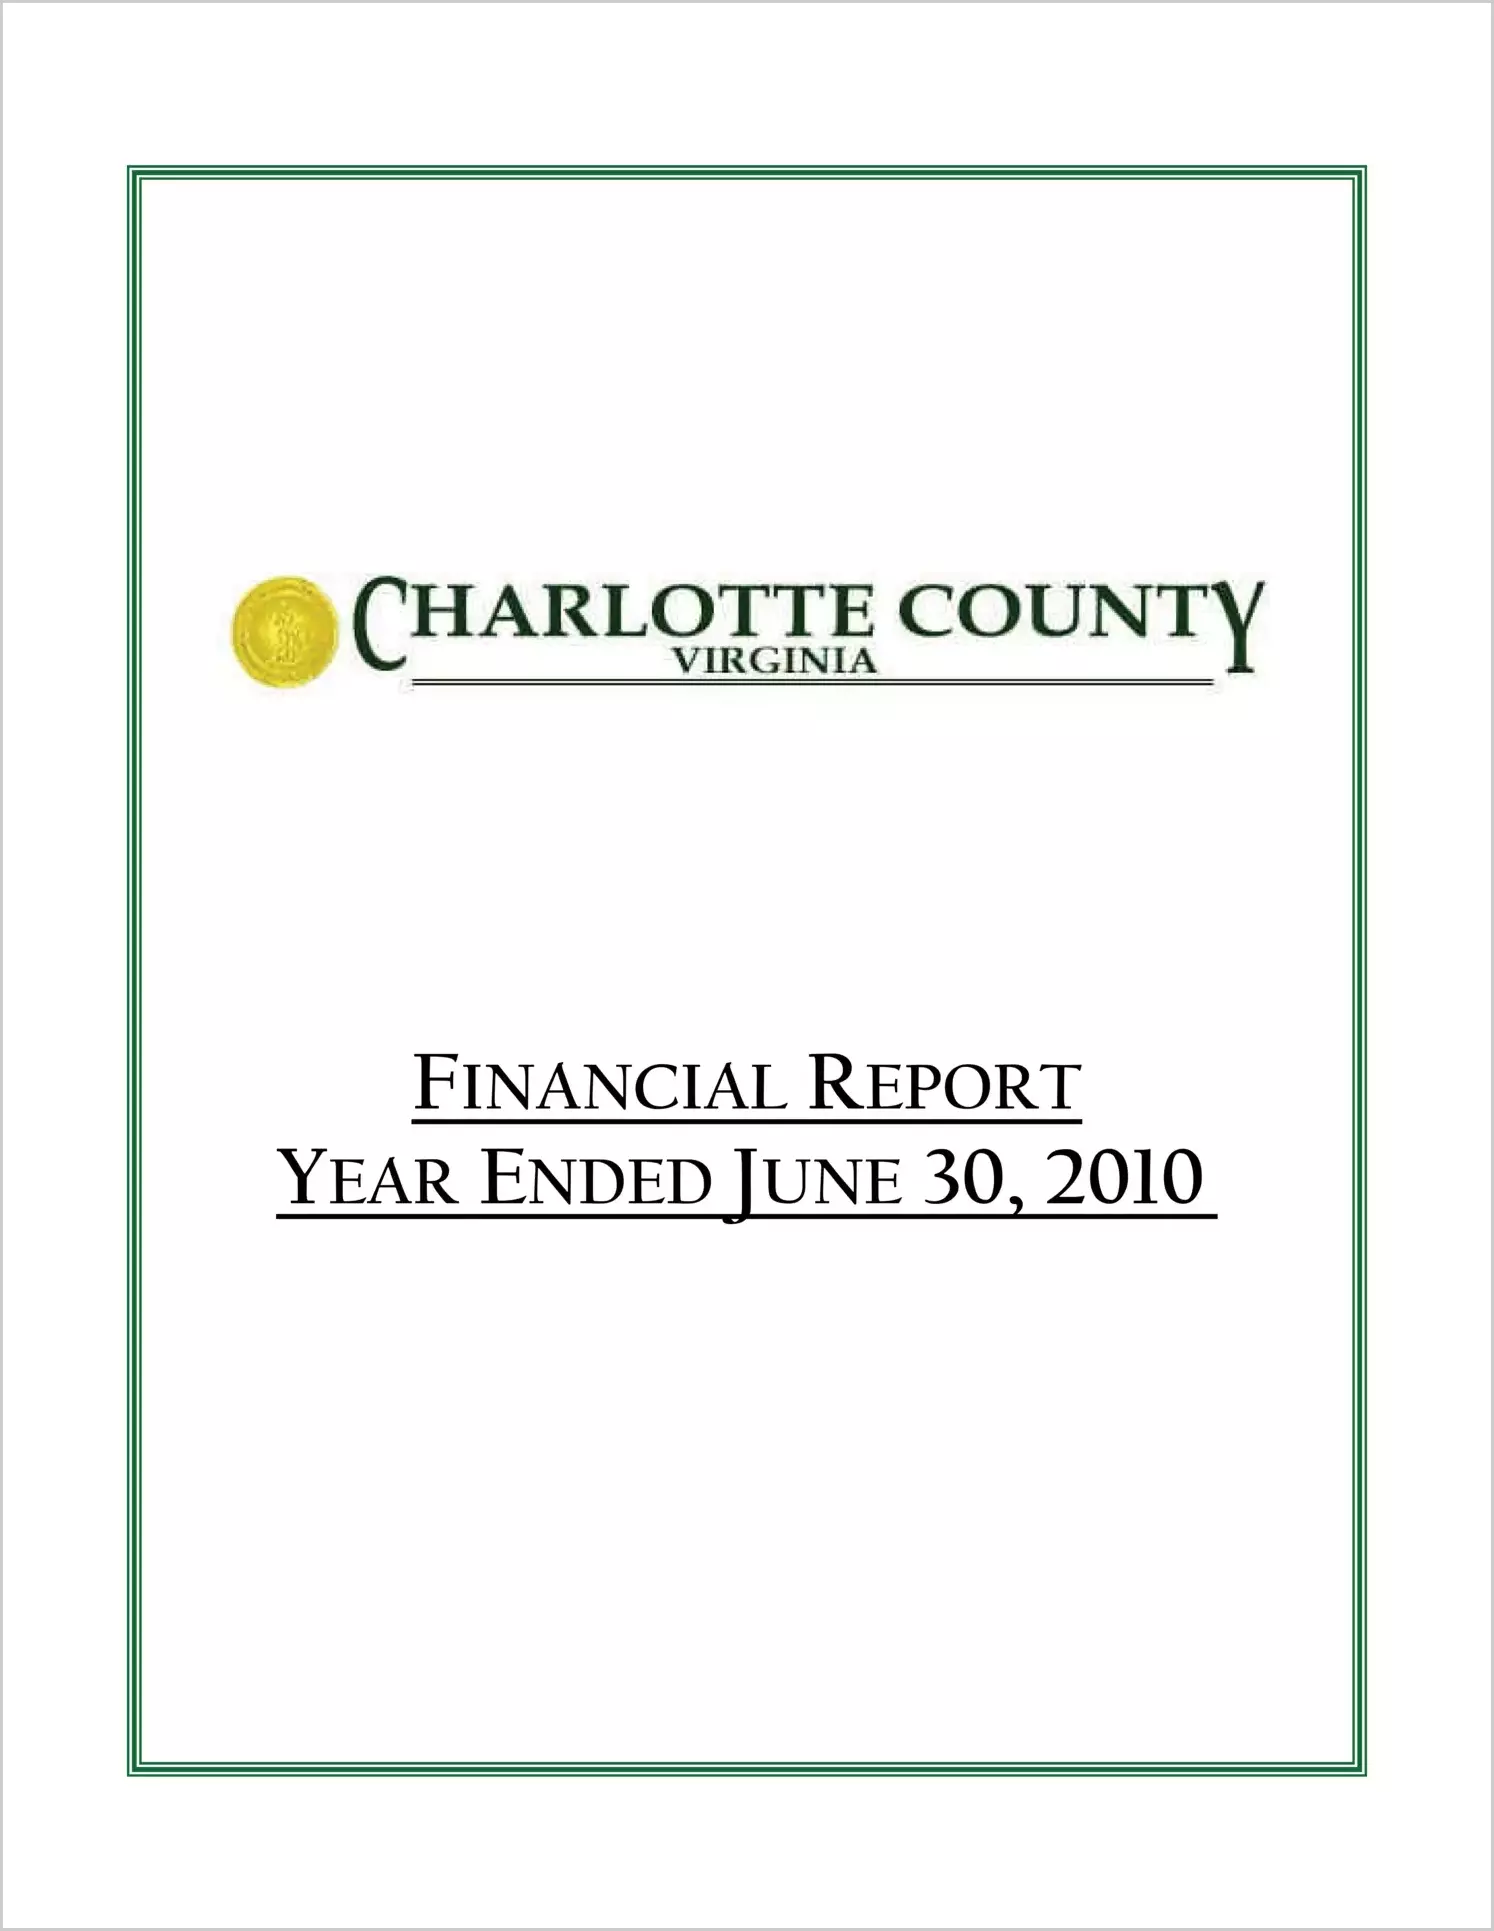 2010 Annual Financial Report for County of Charlotte